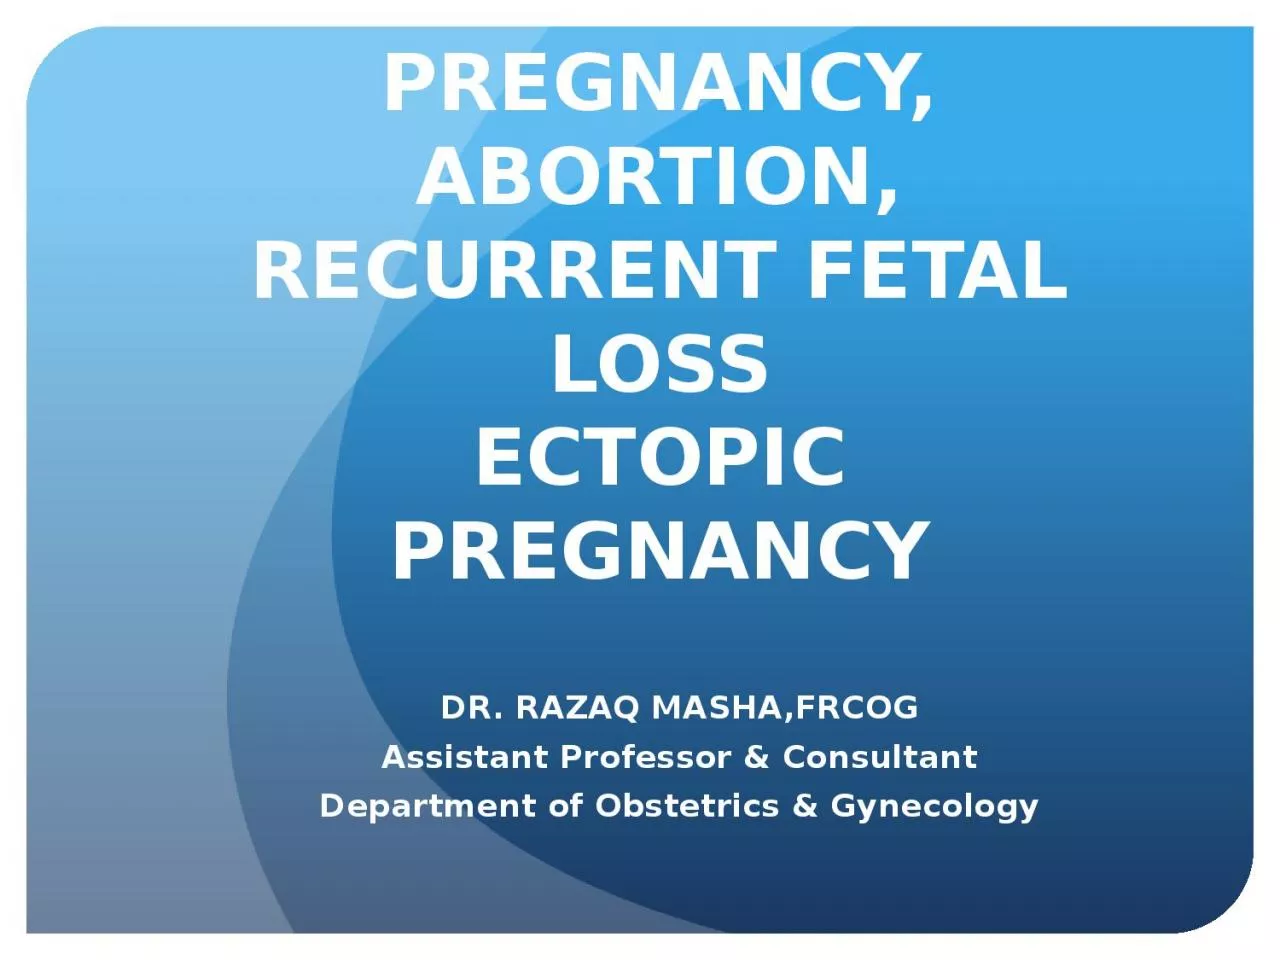 BLEEDING IN EARLY PREGNANCY, ABORTION, RECURRENT FETAL LOSS